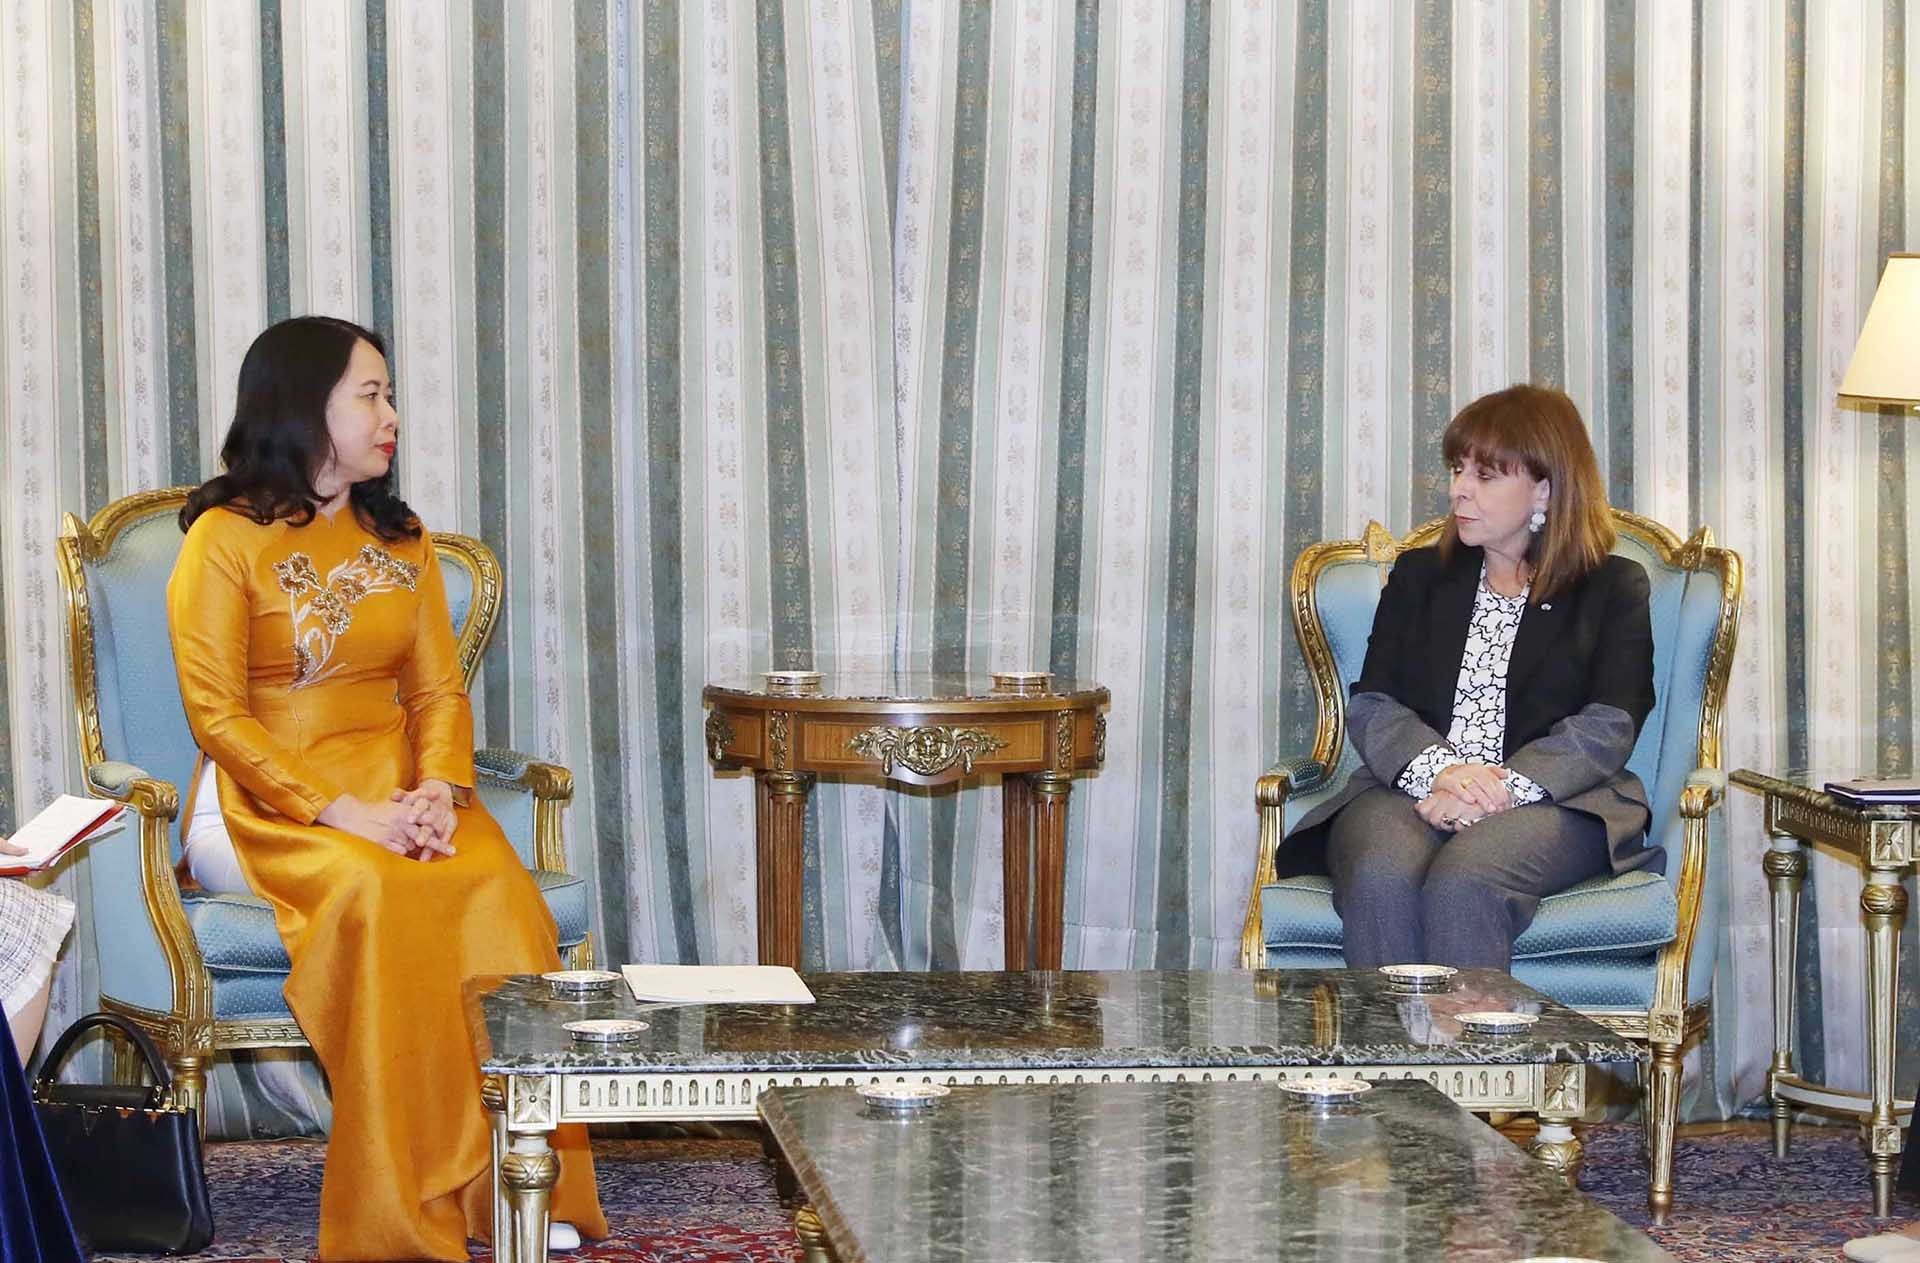 Vietnamese Vice President Vo Thi Anh Xuan pays official visit to Greece